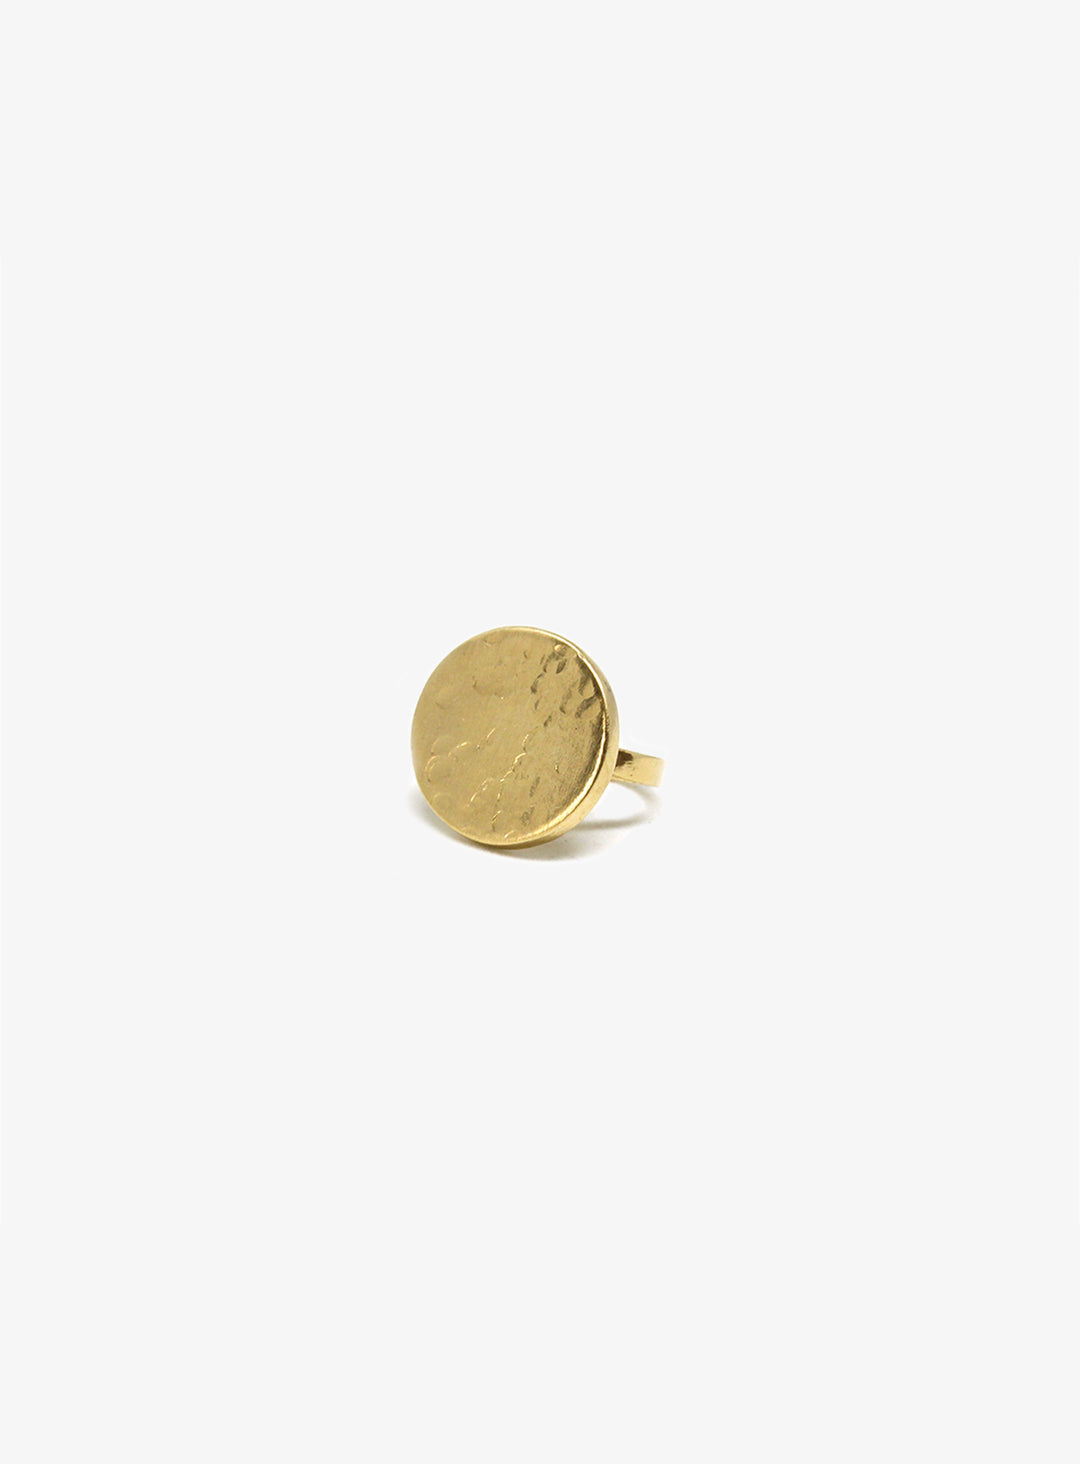 llayers-men-women-rond-gold-moon-hammered-ring-jewelry-mercury-handcrafted-in-Brooklyn-New-York